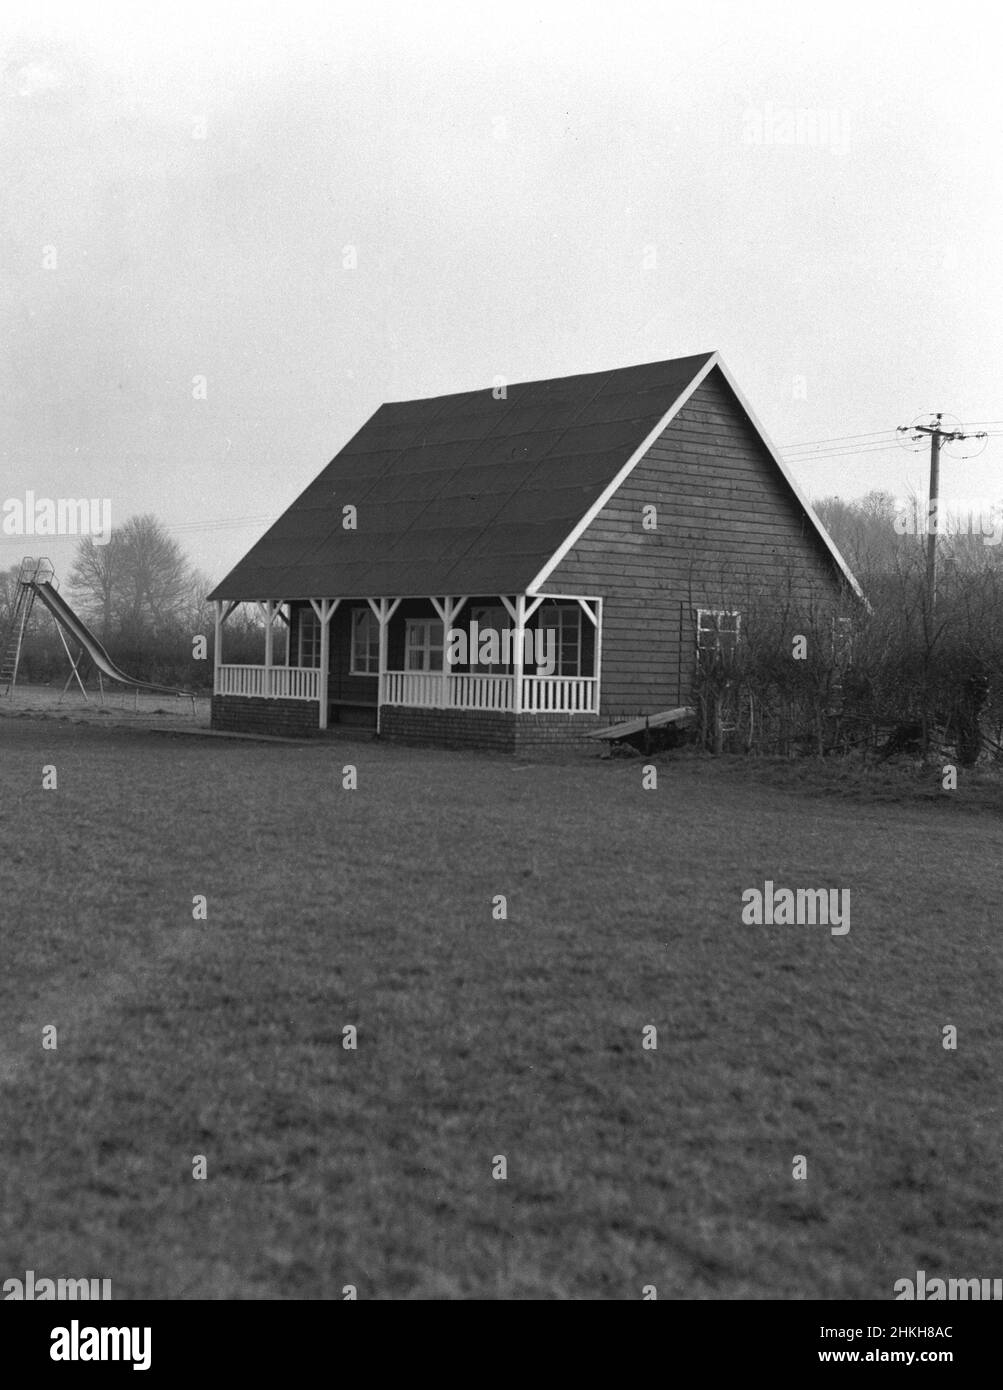 1950s, historical, exterior view of a traditional sports pavilion of the era built with a timber frame on a brick base and a high sloping roof. Architecturally distinctive with a covered porch area or verandah at the front, these types of single-storey buildings on the edge of sports fields were seen at many recreational and sports grounds in Britain at this time, providing changing rooms for team sports such as cricket, rugby and football. Beside this newly constructed pavilion at Witney, Oxford, England, UK, a chlldrens play area, with medal slide. Stock Photo